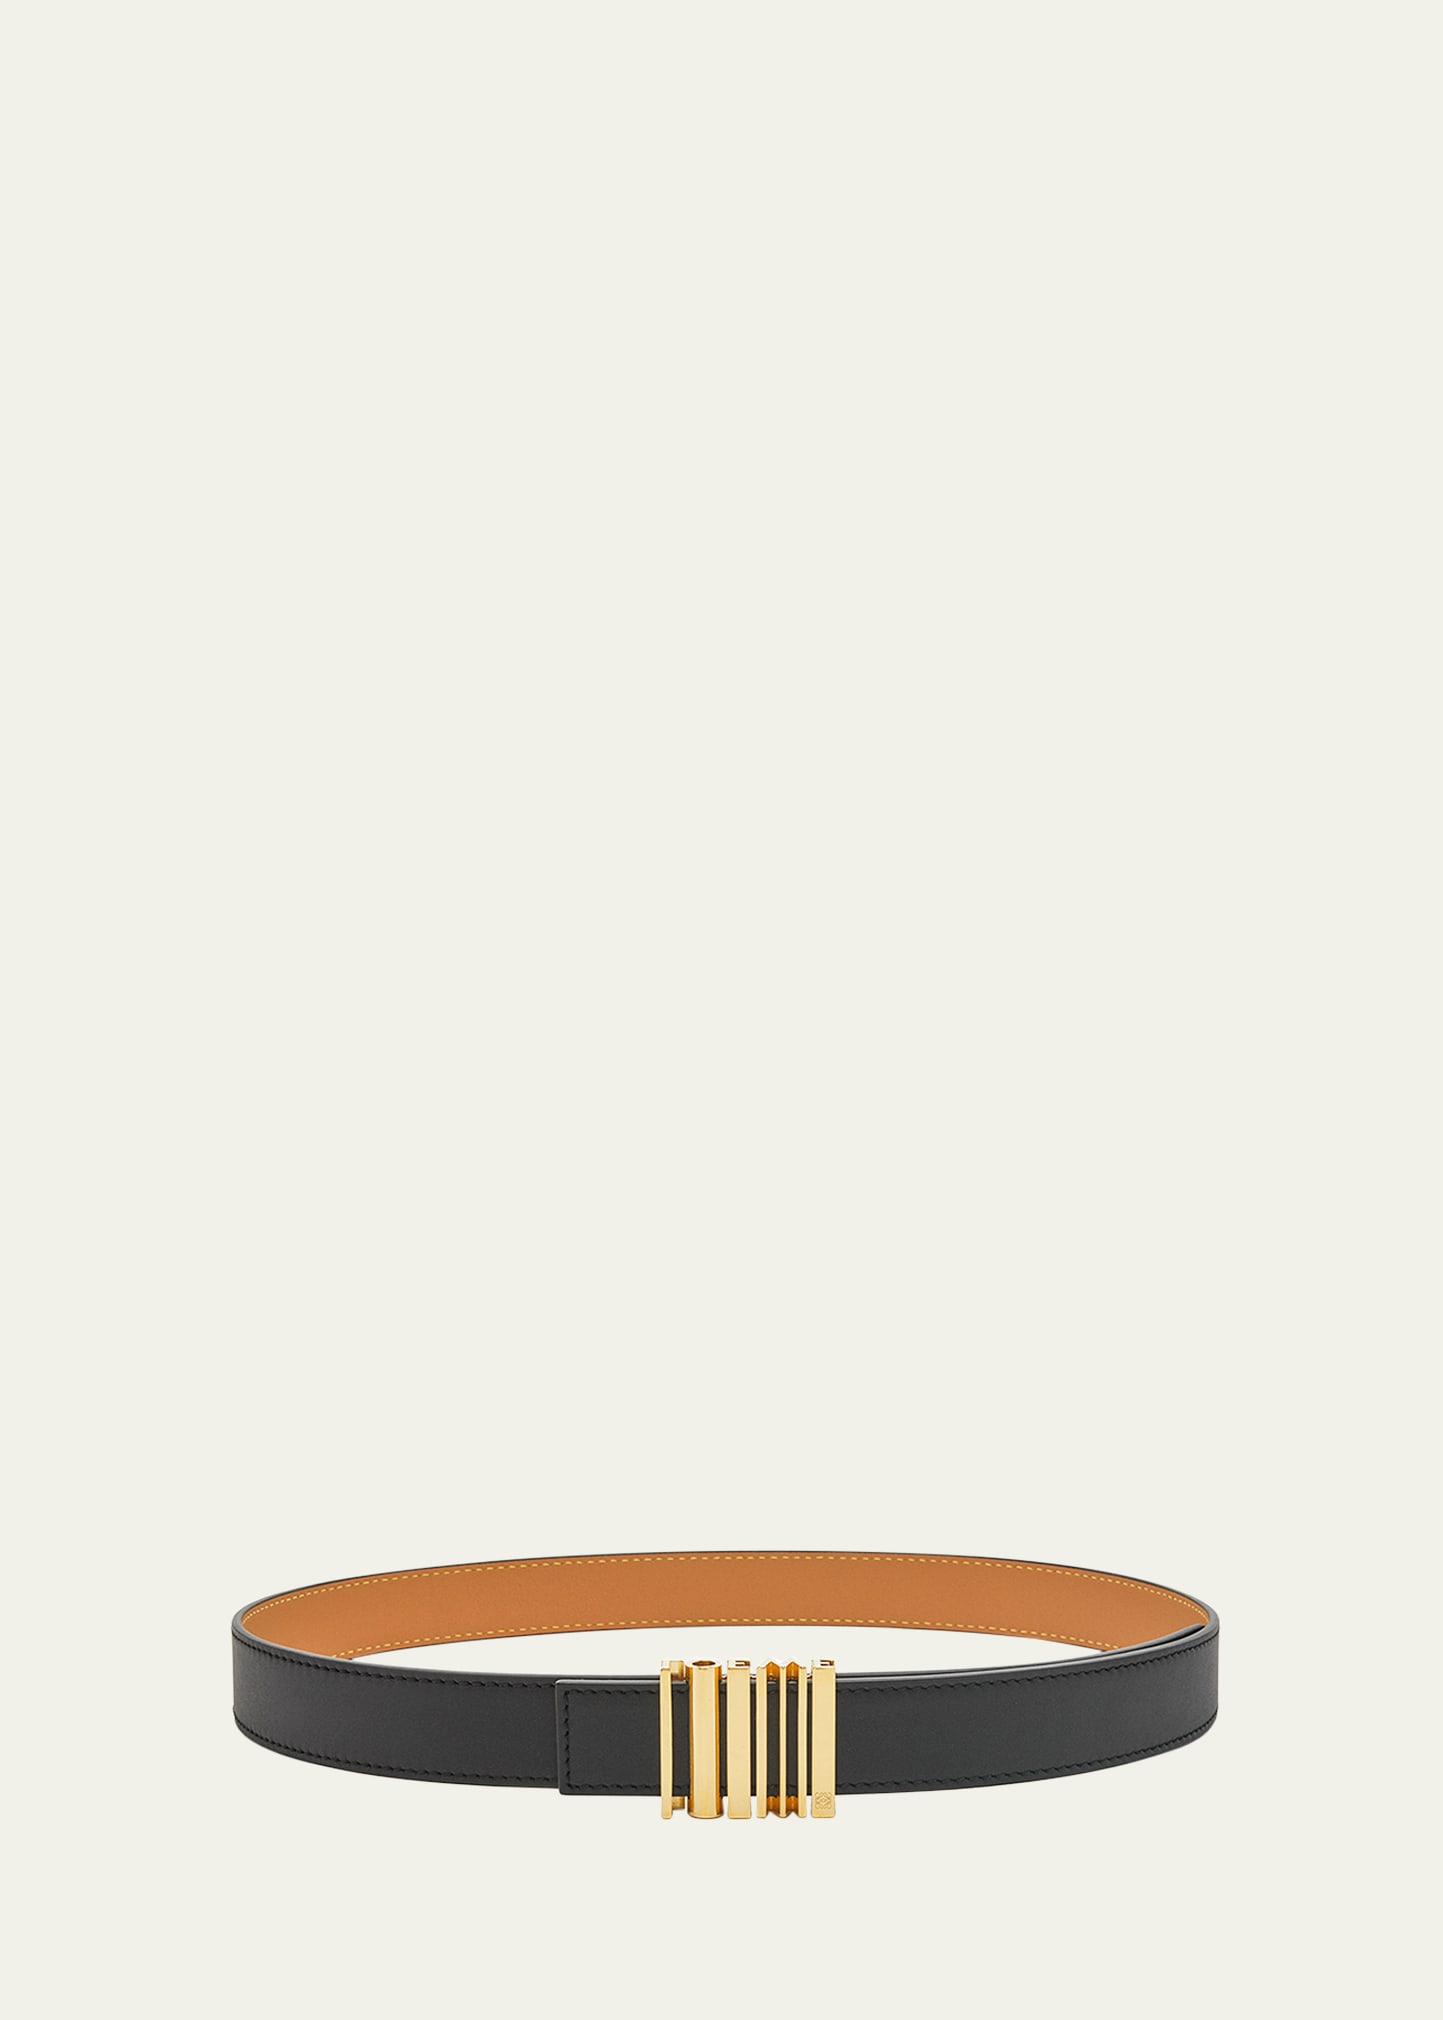 Loewe Graphic Buckle Leather Belt In Black Gold